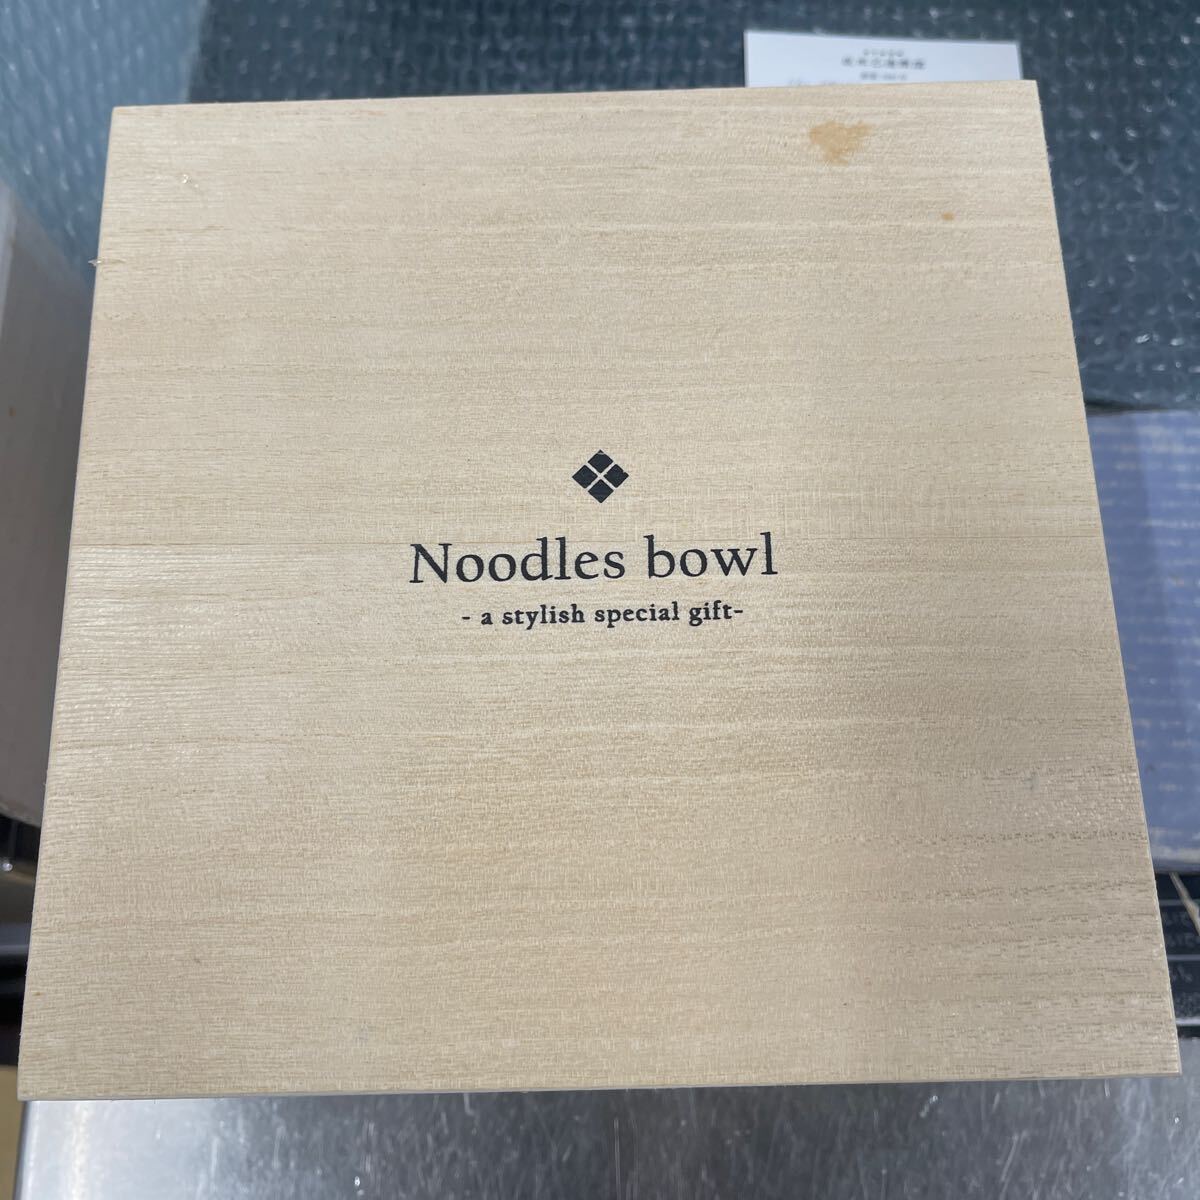 ● Noodles bowl 坂本乙造商店 創業1900年 うるし 伝統工芸品 産直ギフト 食器 ボウル 2セット 未使用品 ●の画像5